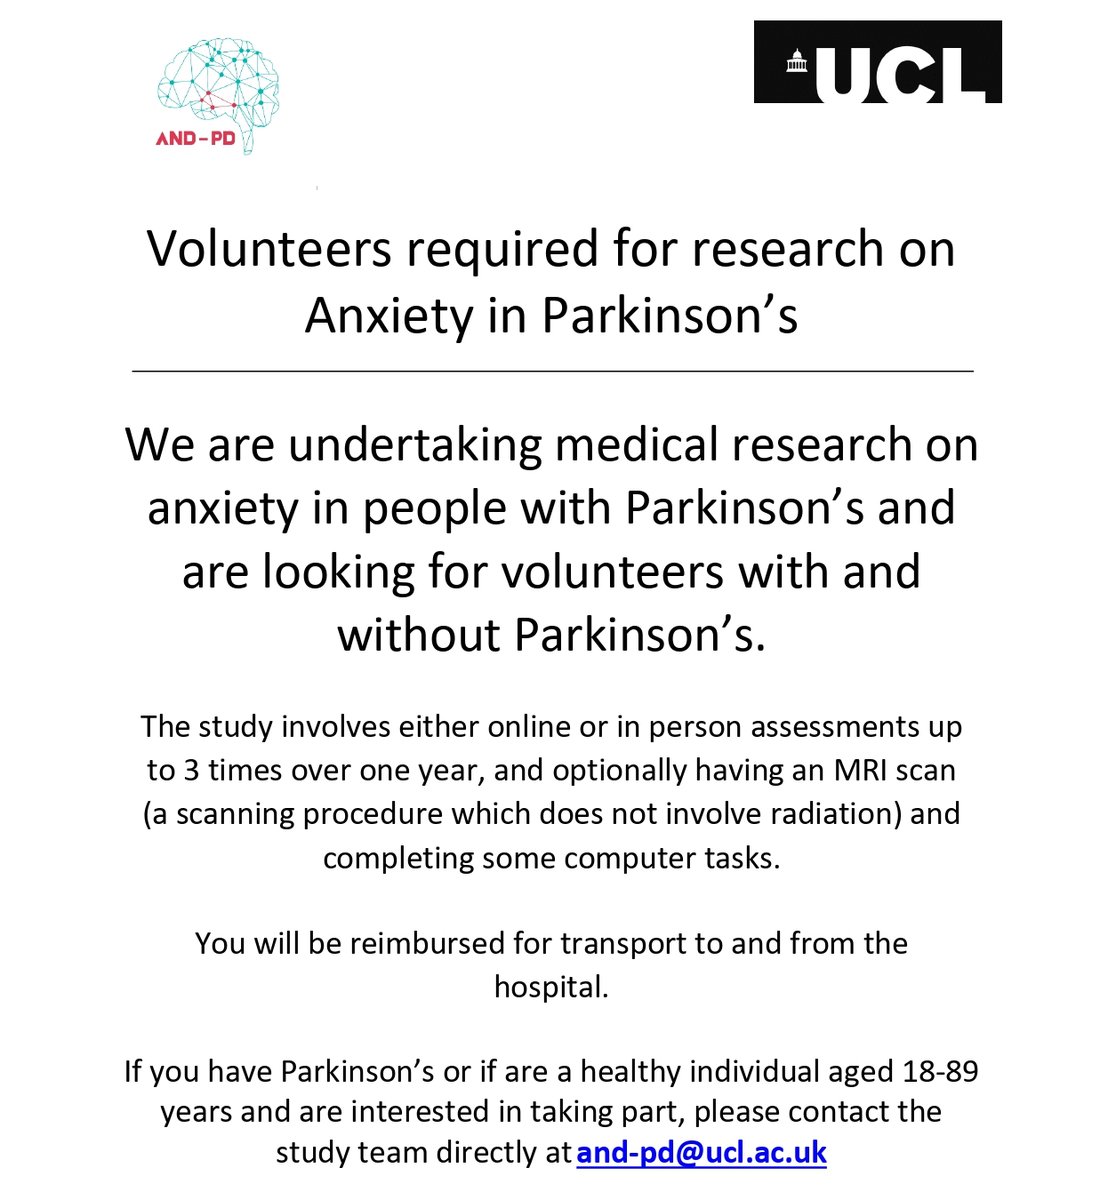 If you're aged 18-89 and experience anxiety, we want to hear from you! We are looking for participants who are interested in making a difference. Get in touch with us to learn more about how you can get involved. 

#ClinicalTrials #ParticipateInResearch #ResearchOpportunity